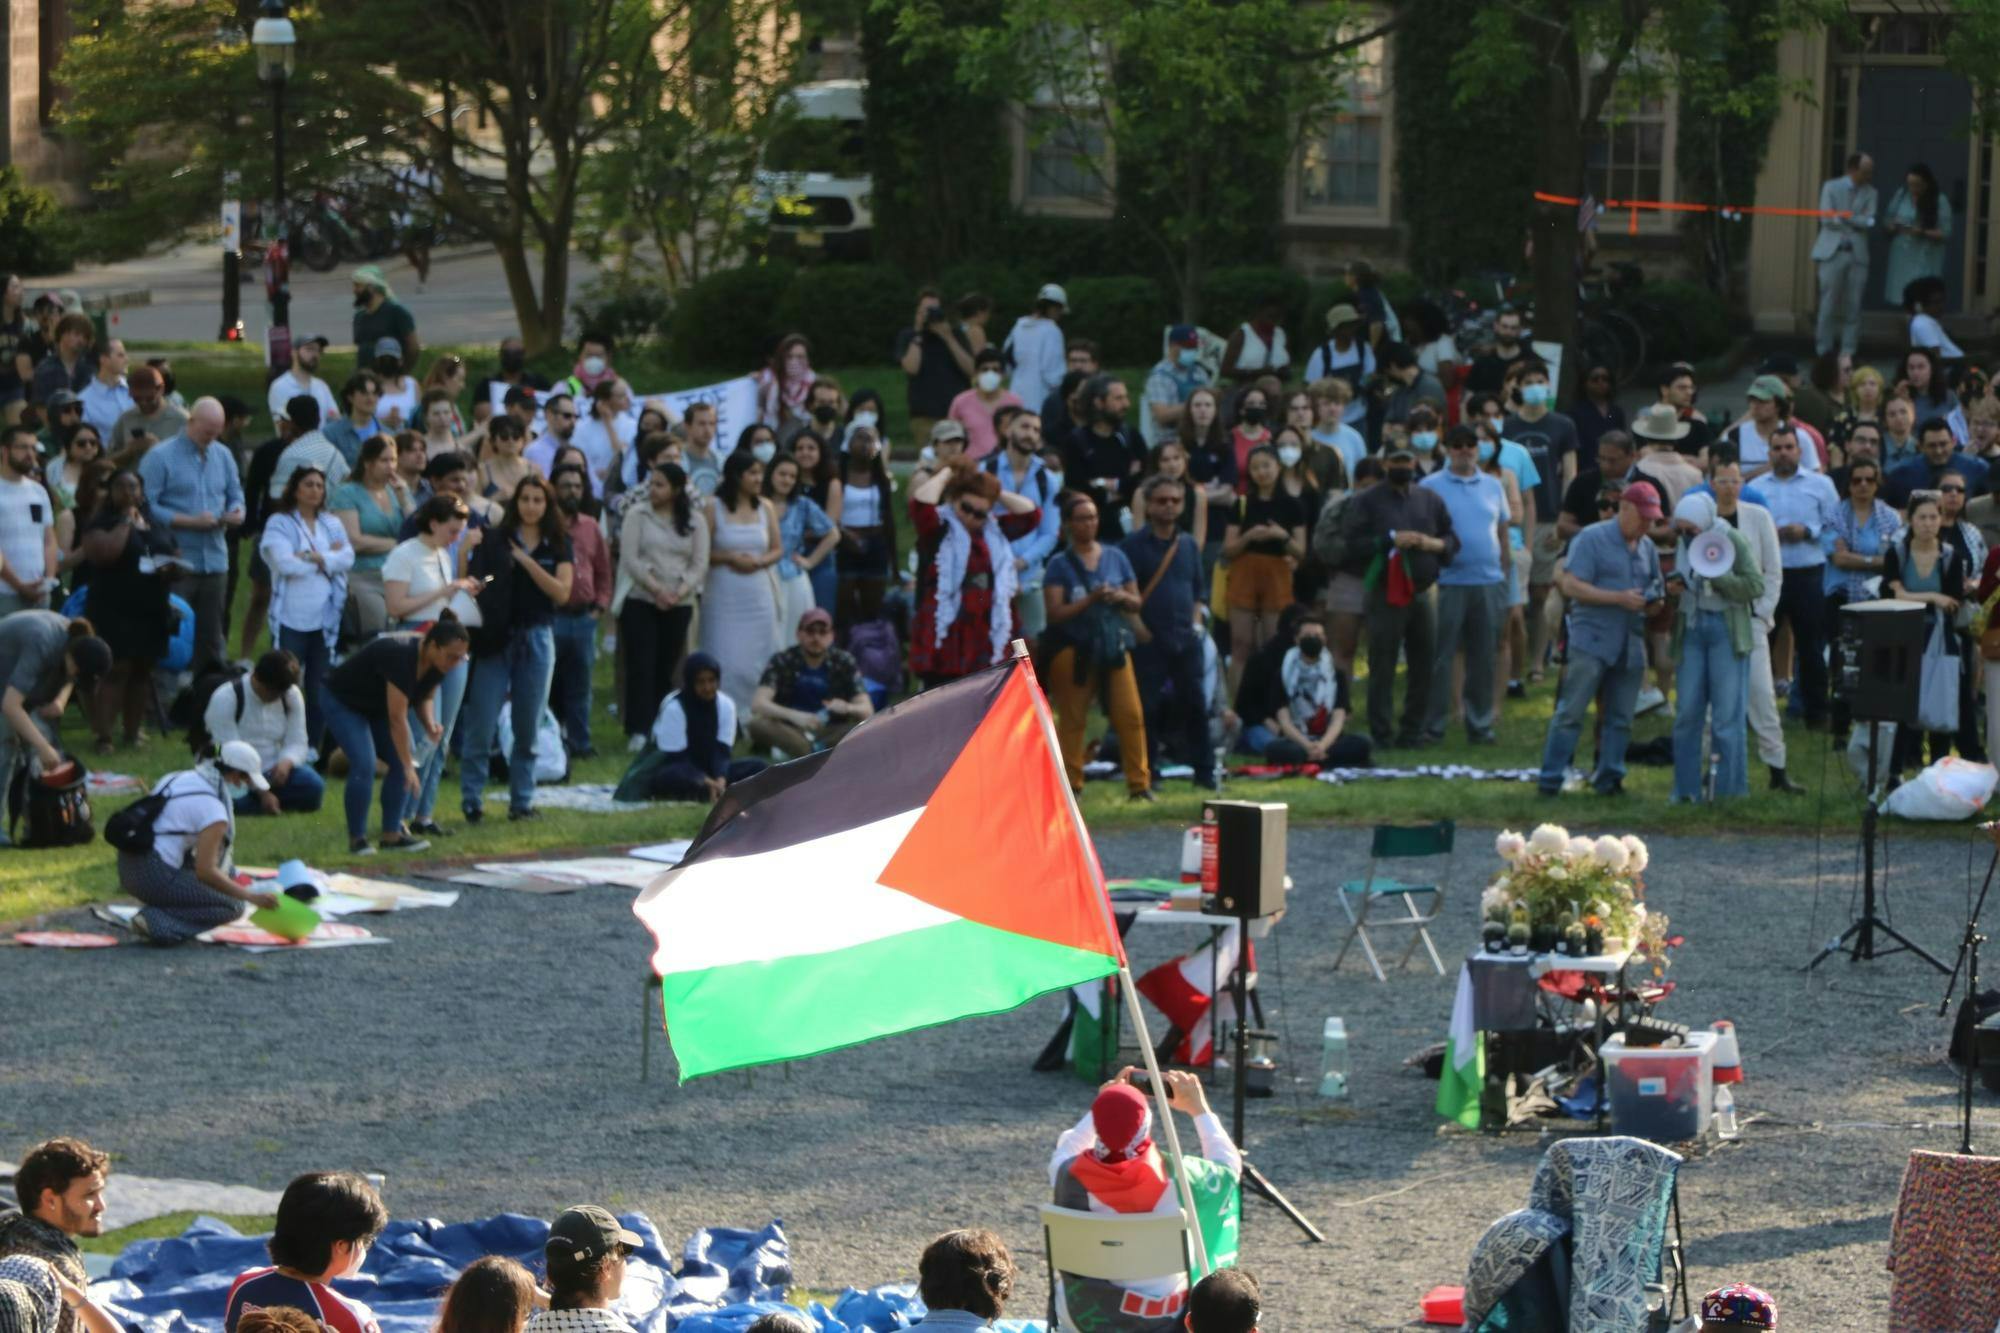 A ring of people stand in a circle. In the center, a Palestinian flag waves.